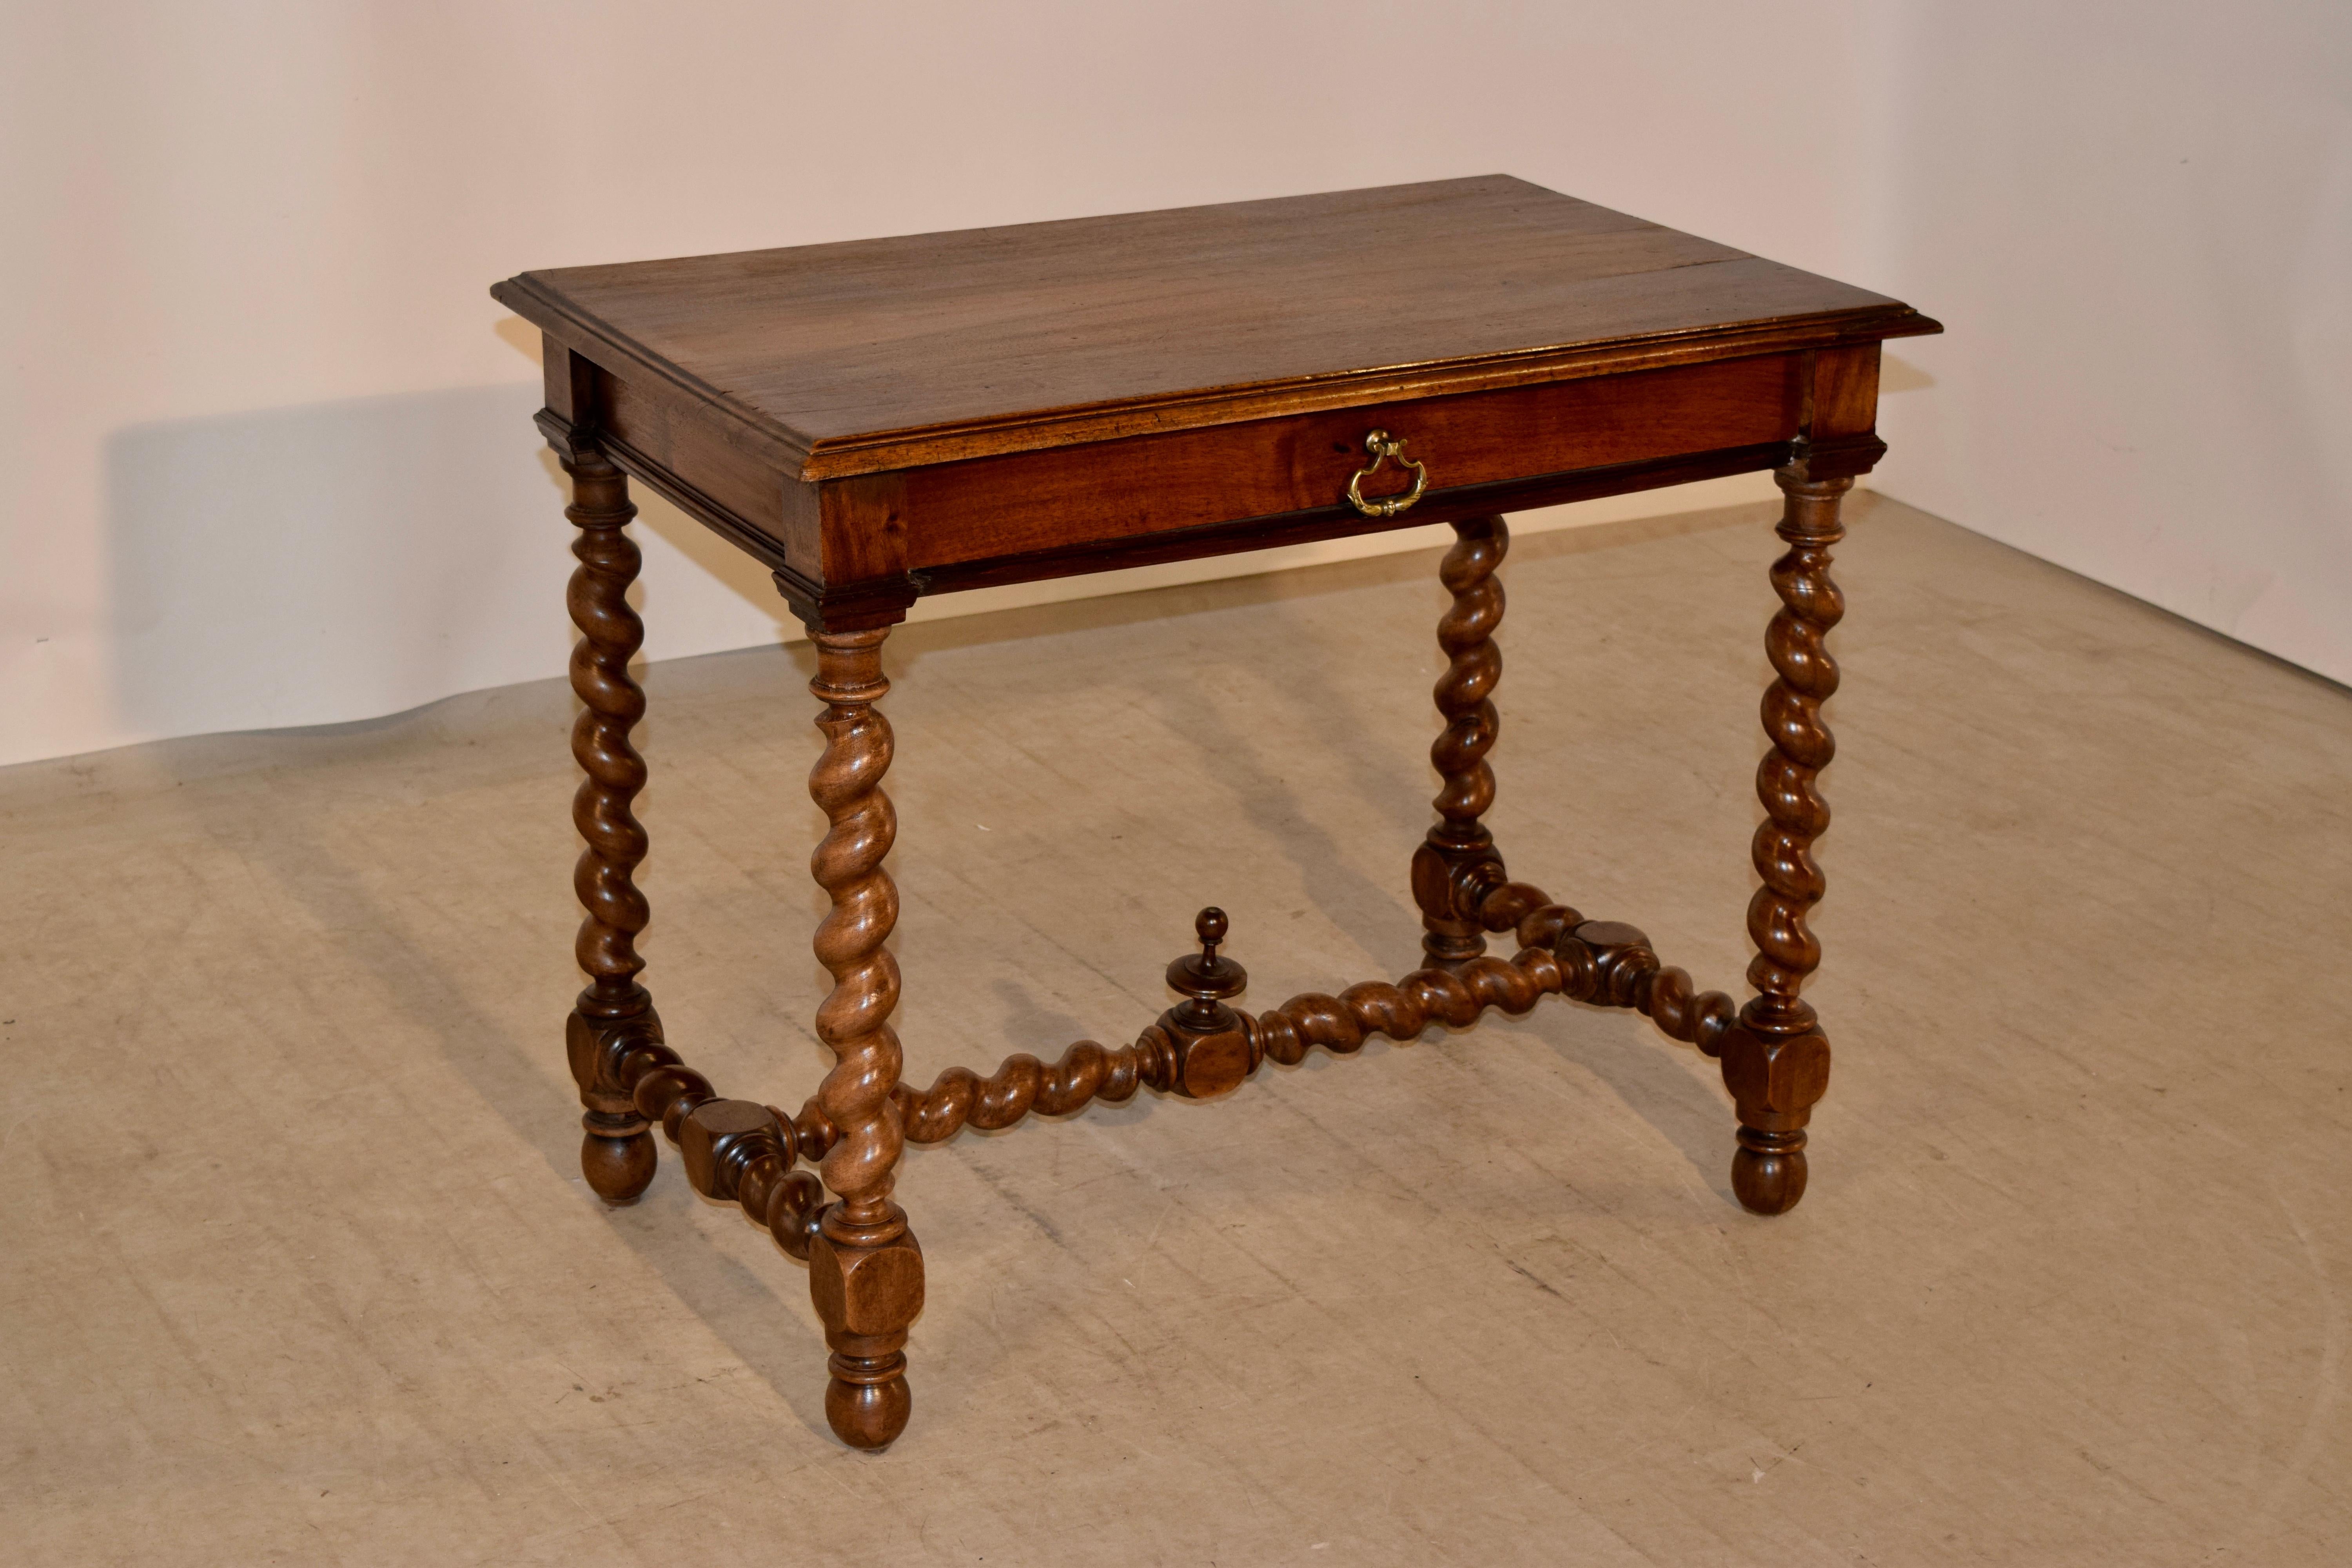 19th century walnut side table from France with a beveled and molded edge around the top, following down to a simple apron which contains a single drawer in the front of the piece. The table is supported on hand turned barley twist legs and matching